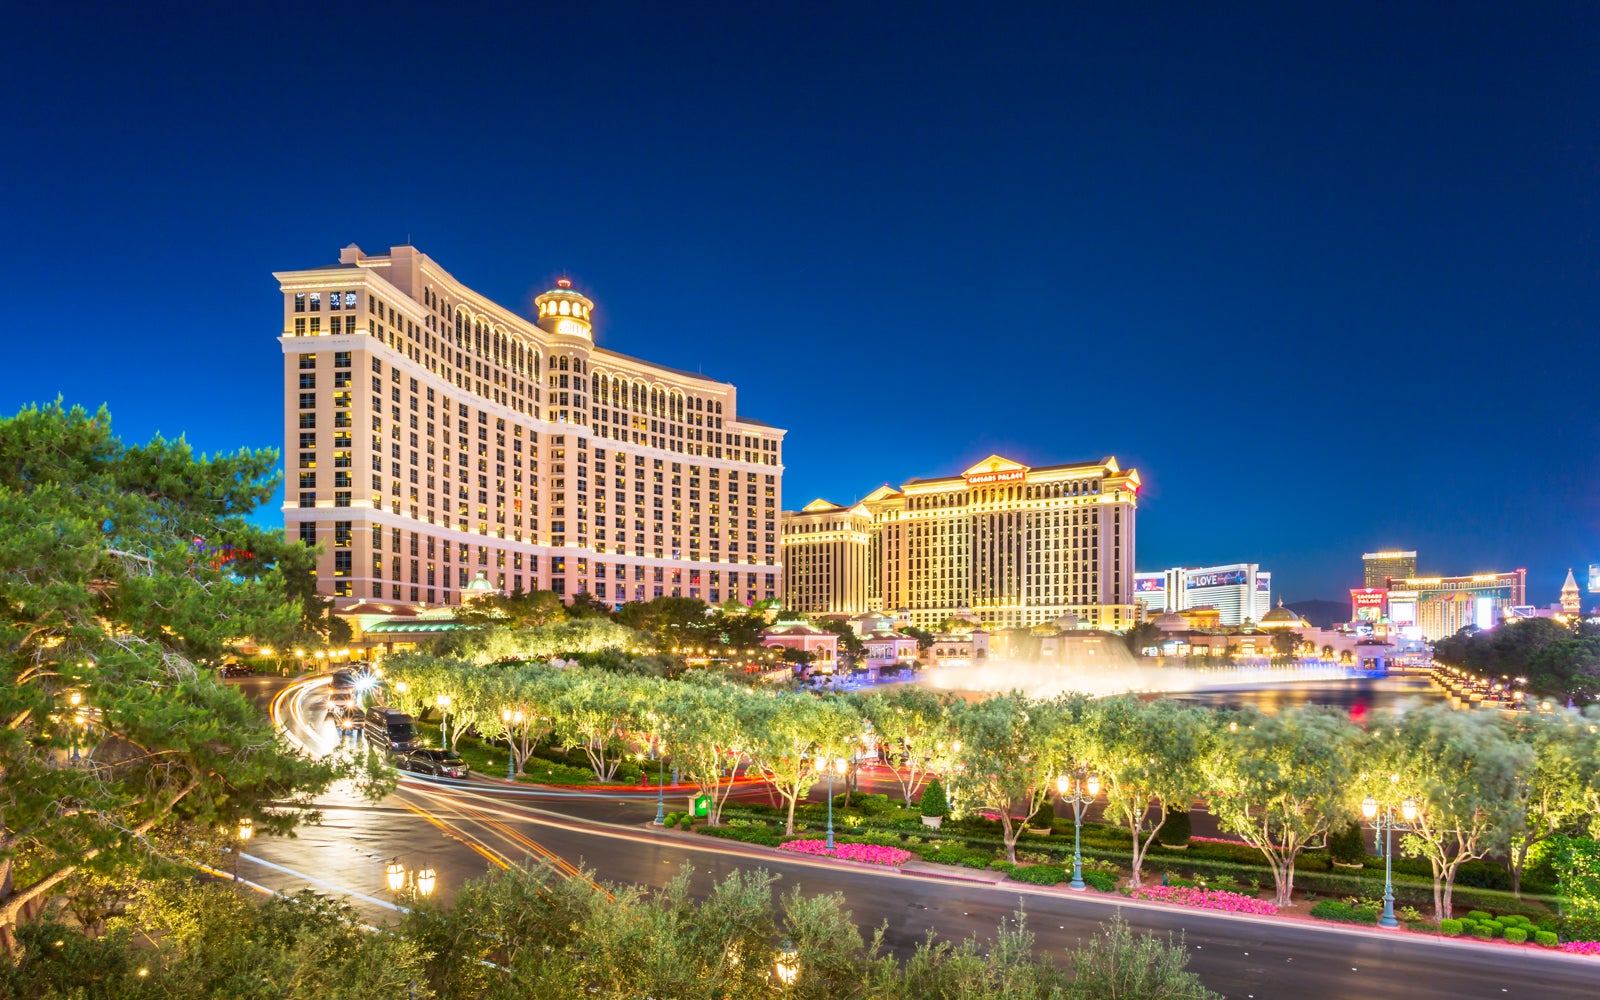 Cosmopolitan, Aria, Bellagio guests now have reciprocal room-charging  privileges - The Points Guy